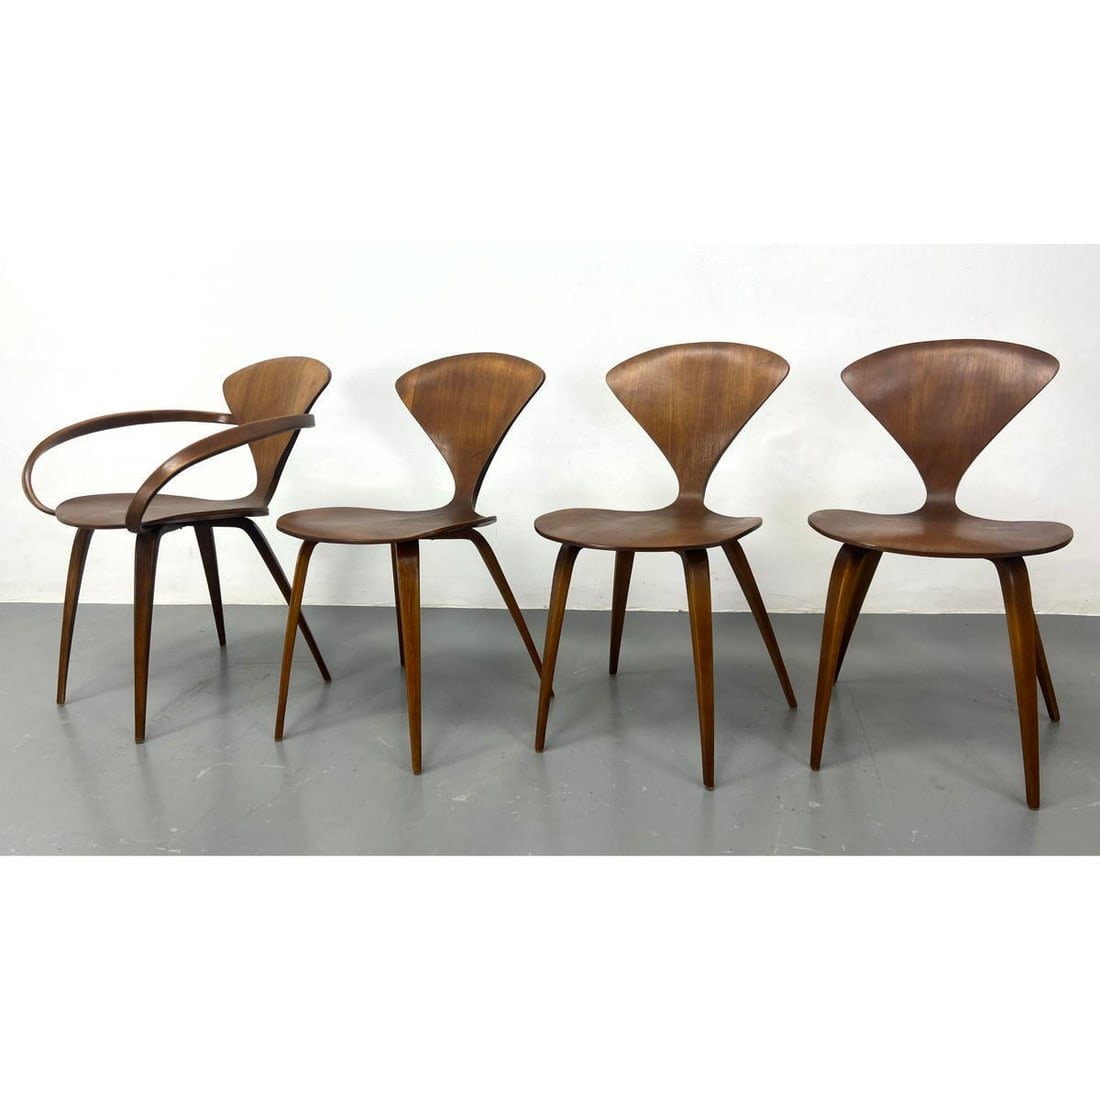 Set of 4 Norman Cherner chairs 3629c7